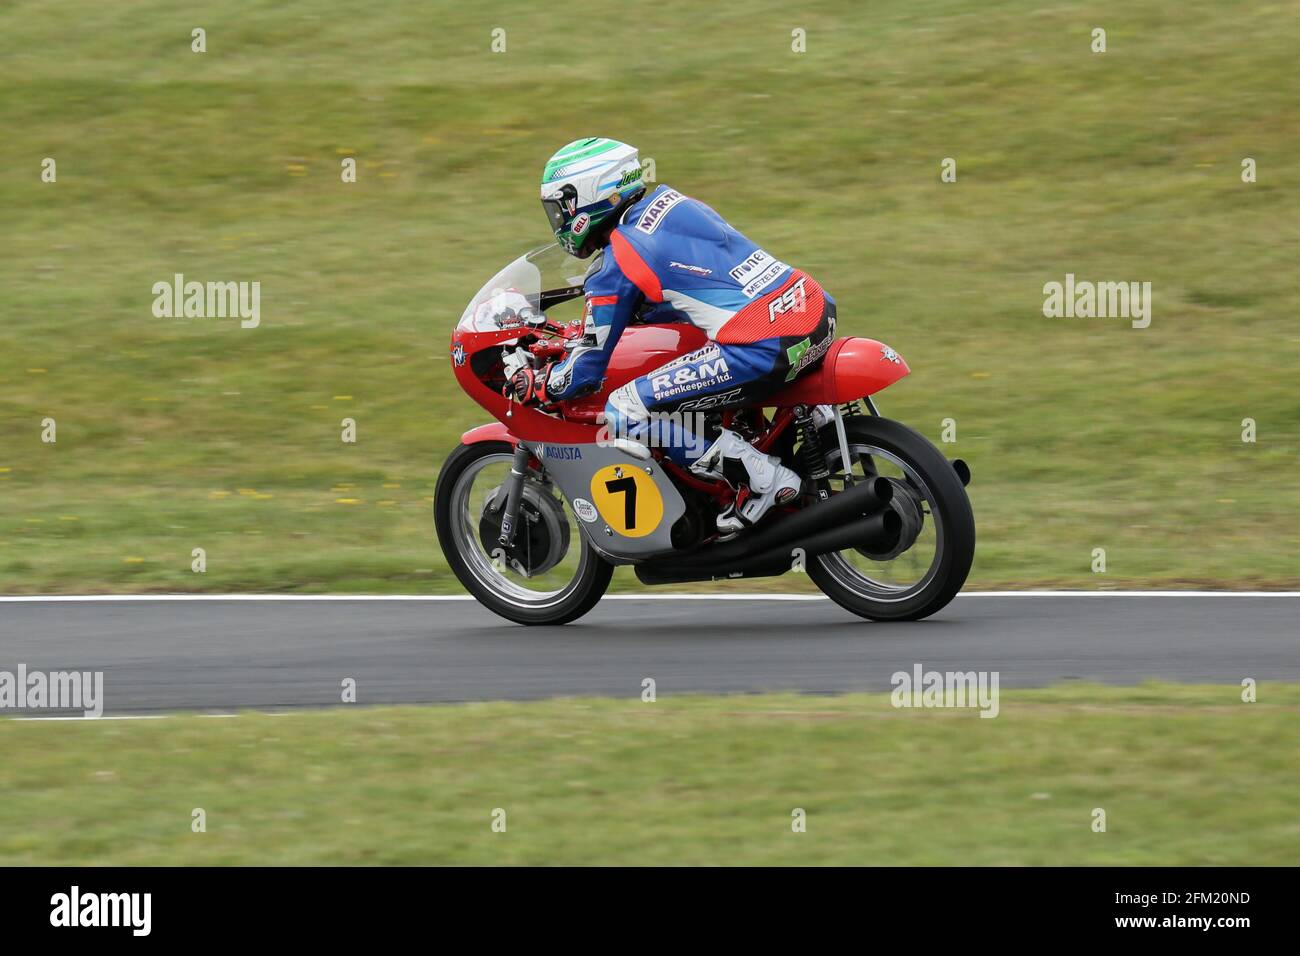 Gary Johnson approaches The Goioseneck riding the MV Agusta 500 '3' at the Cadwell Park International Classic, July 2015 Stock Photo